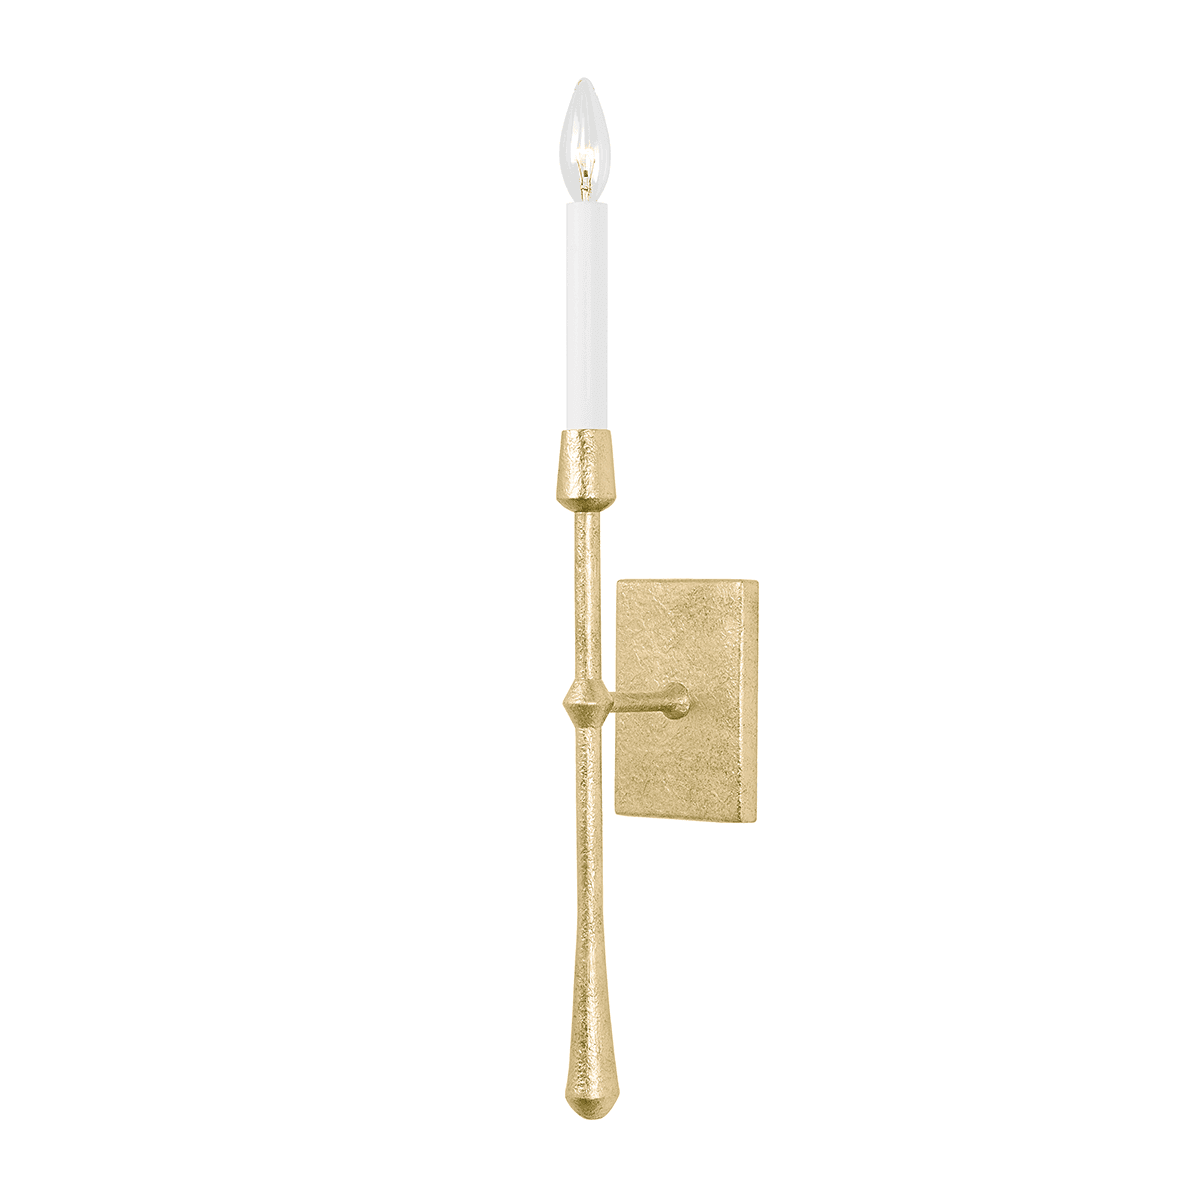 Hudson Valley Lighting - Hathaway Wall Sconce - 2221-VGL | Montreal Lighting & Hardware